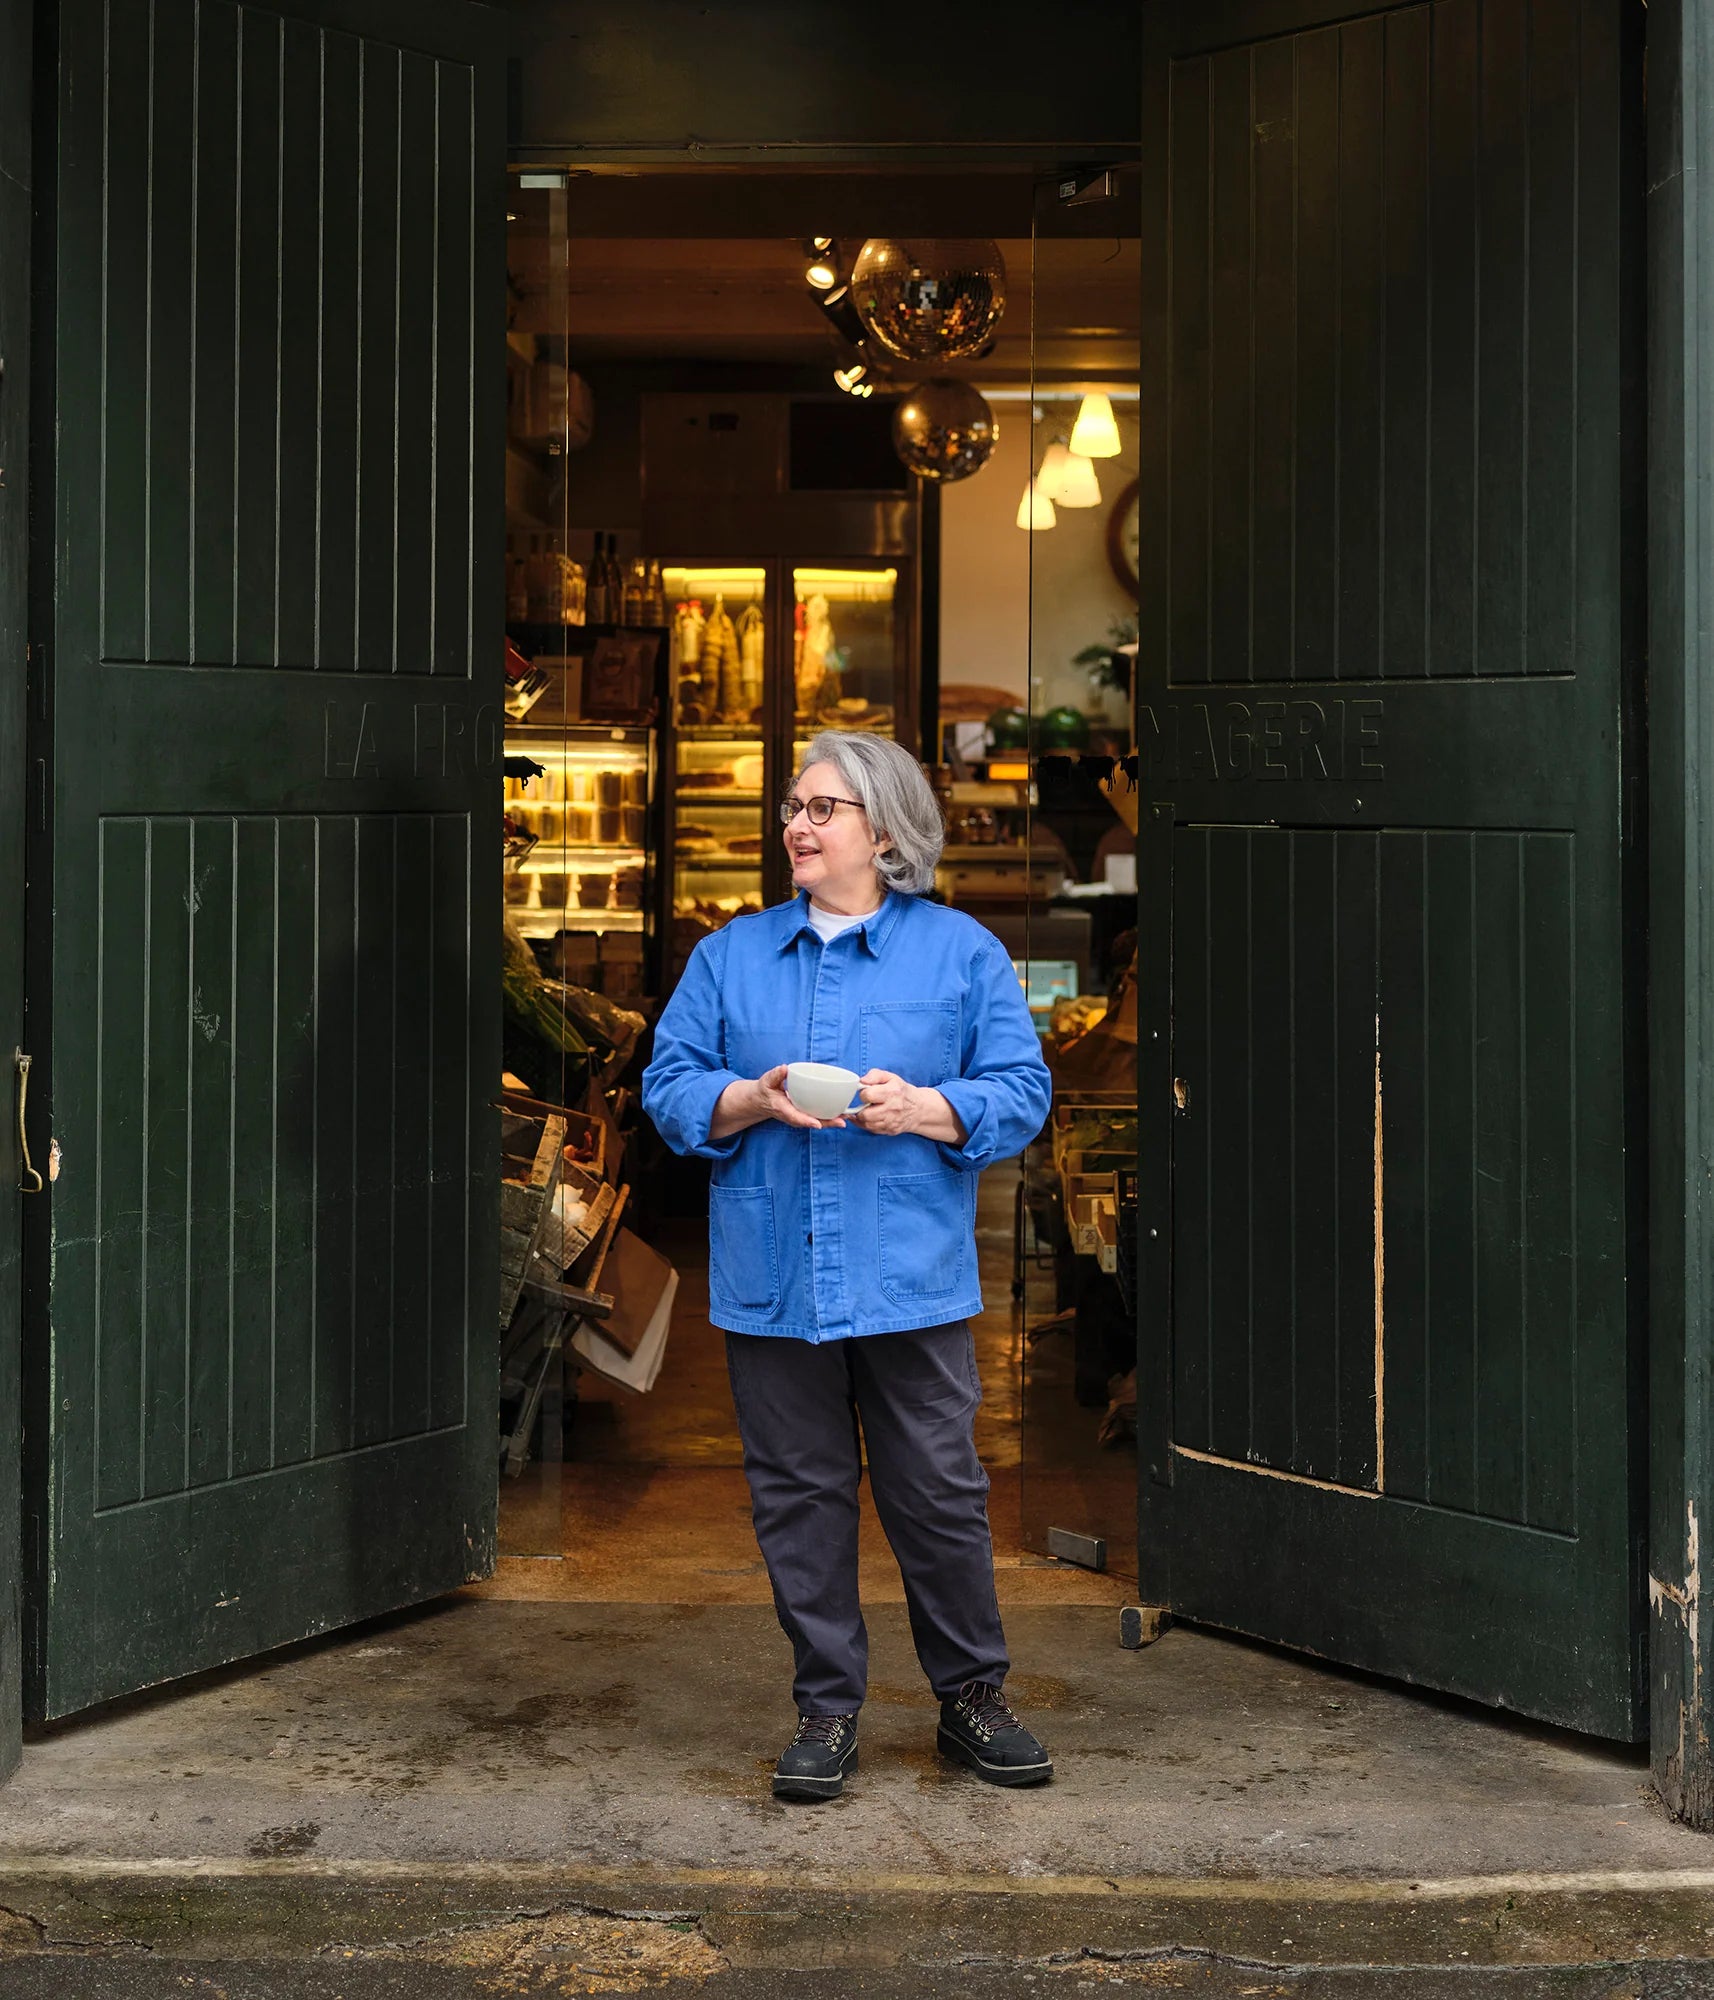 Q&A with Patricia Michelson, founder of La Fromagerie